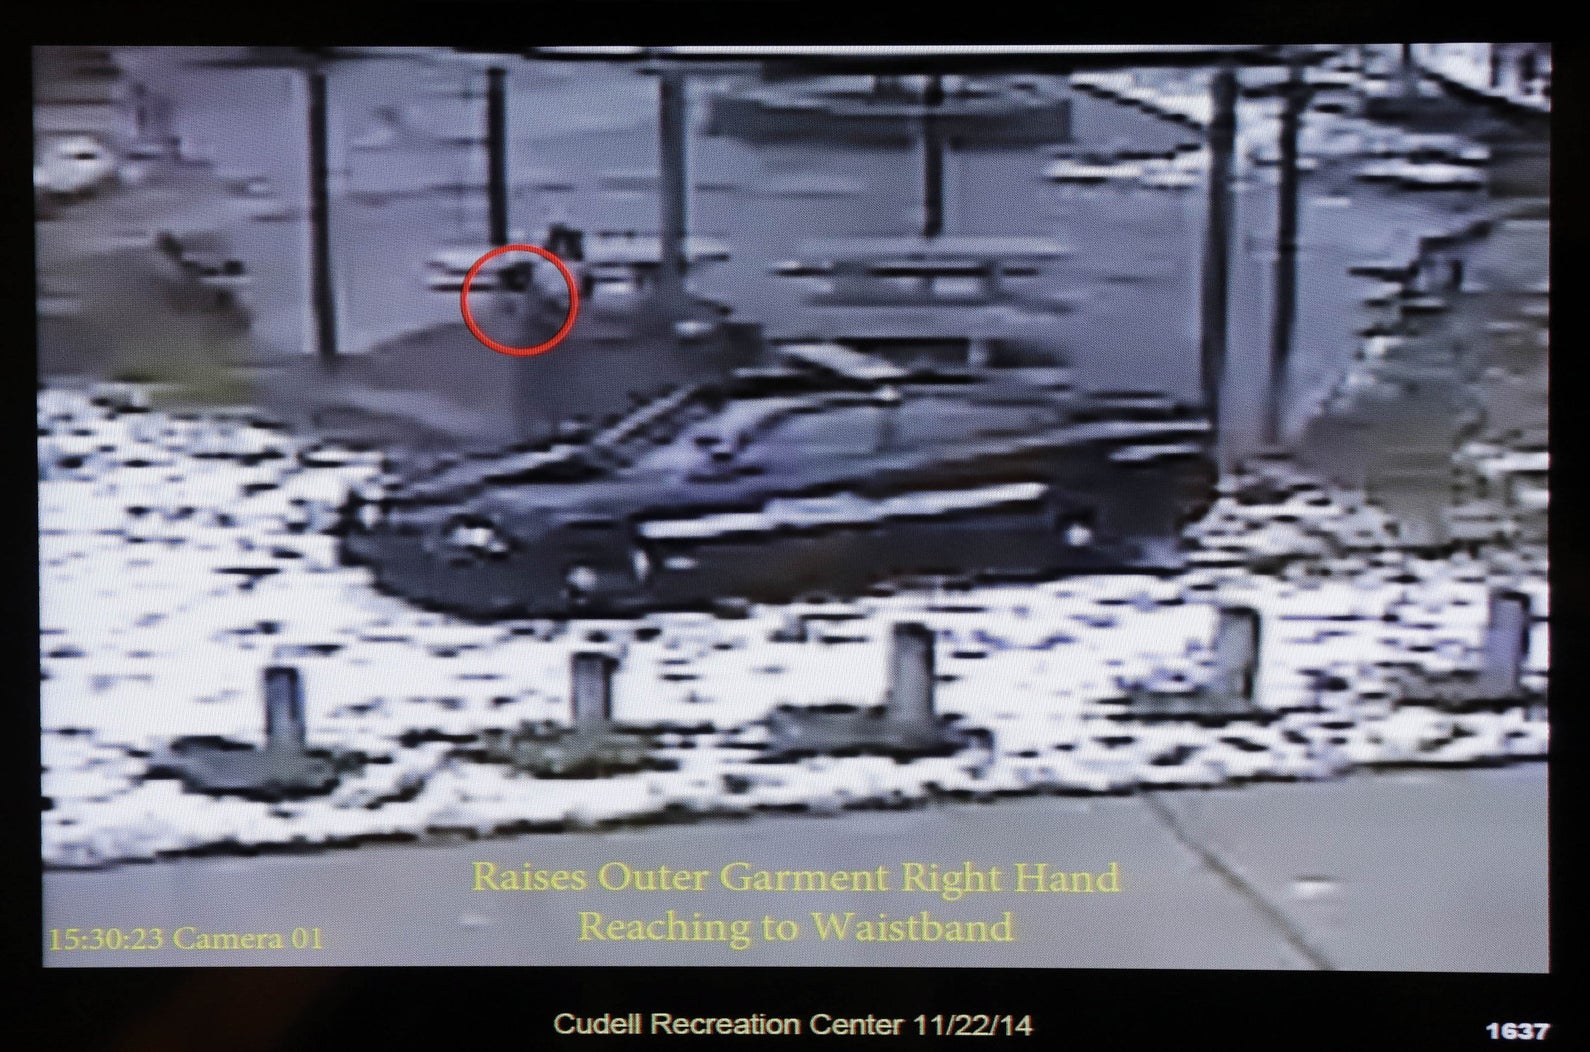 Surveillance video showing officers arrive at Cudell Park where Tamir Rice was playing.